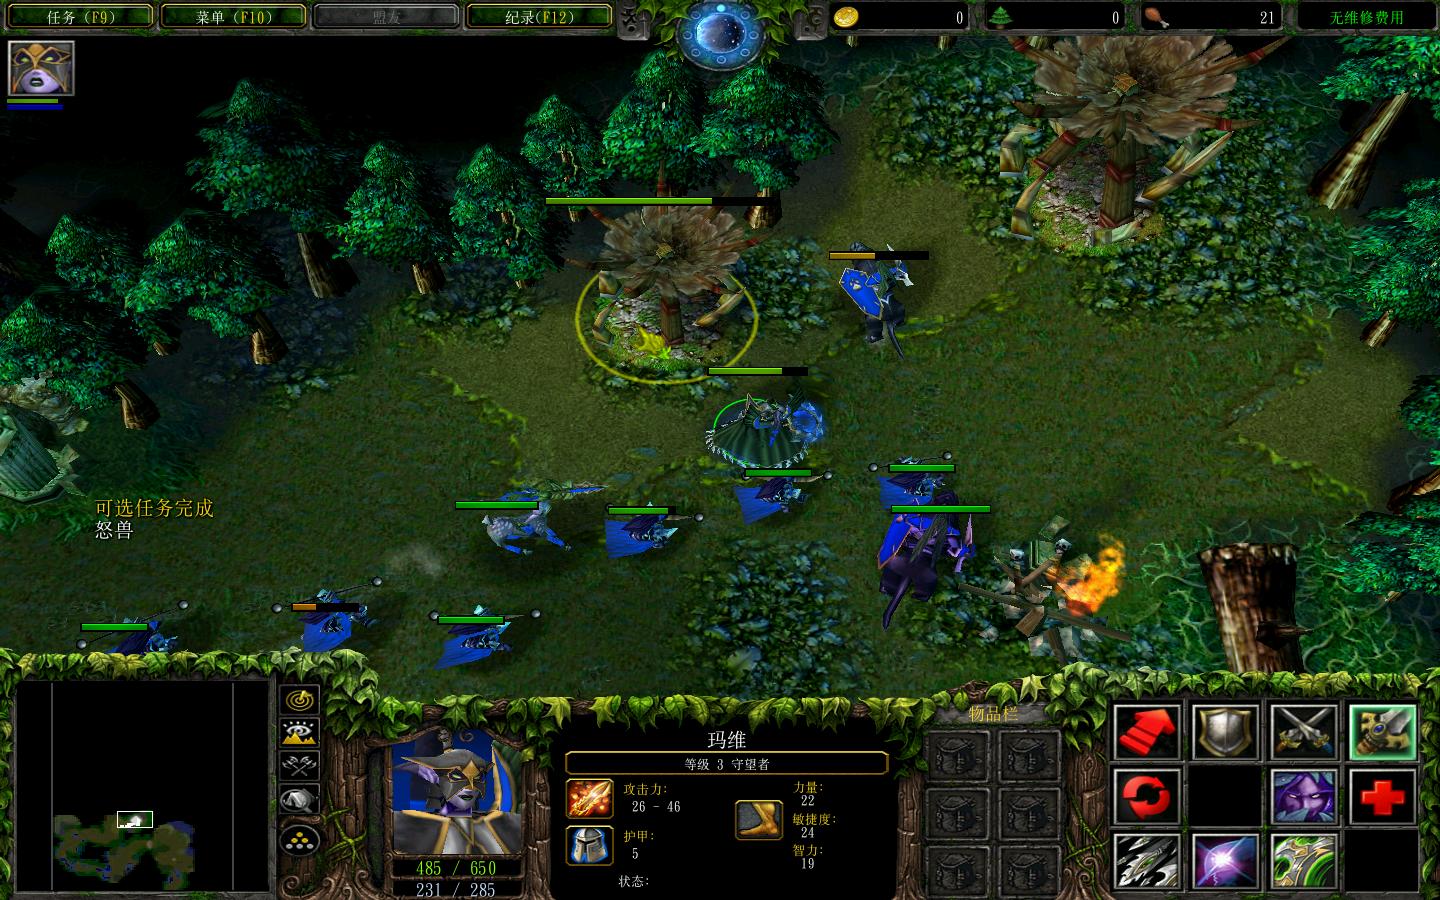 ħ3Warcraft III The Frozen Thronev1.24Ԫv1.18